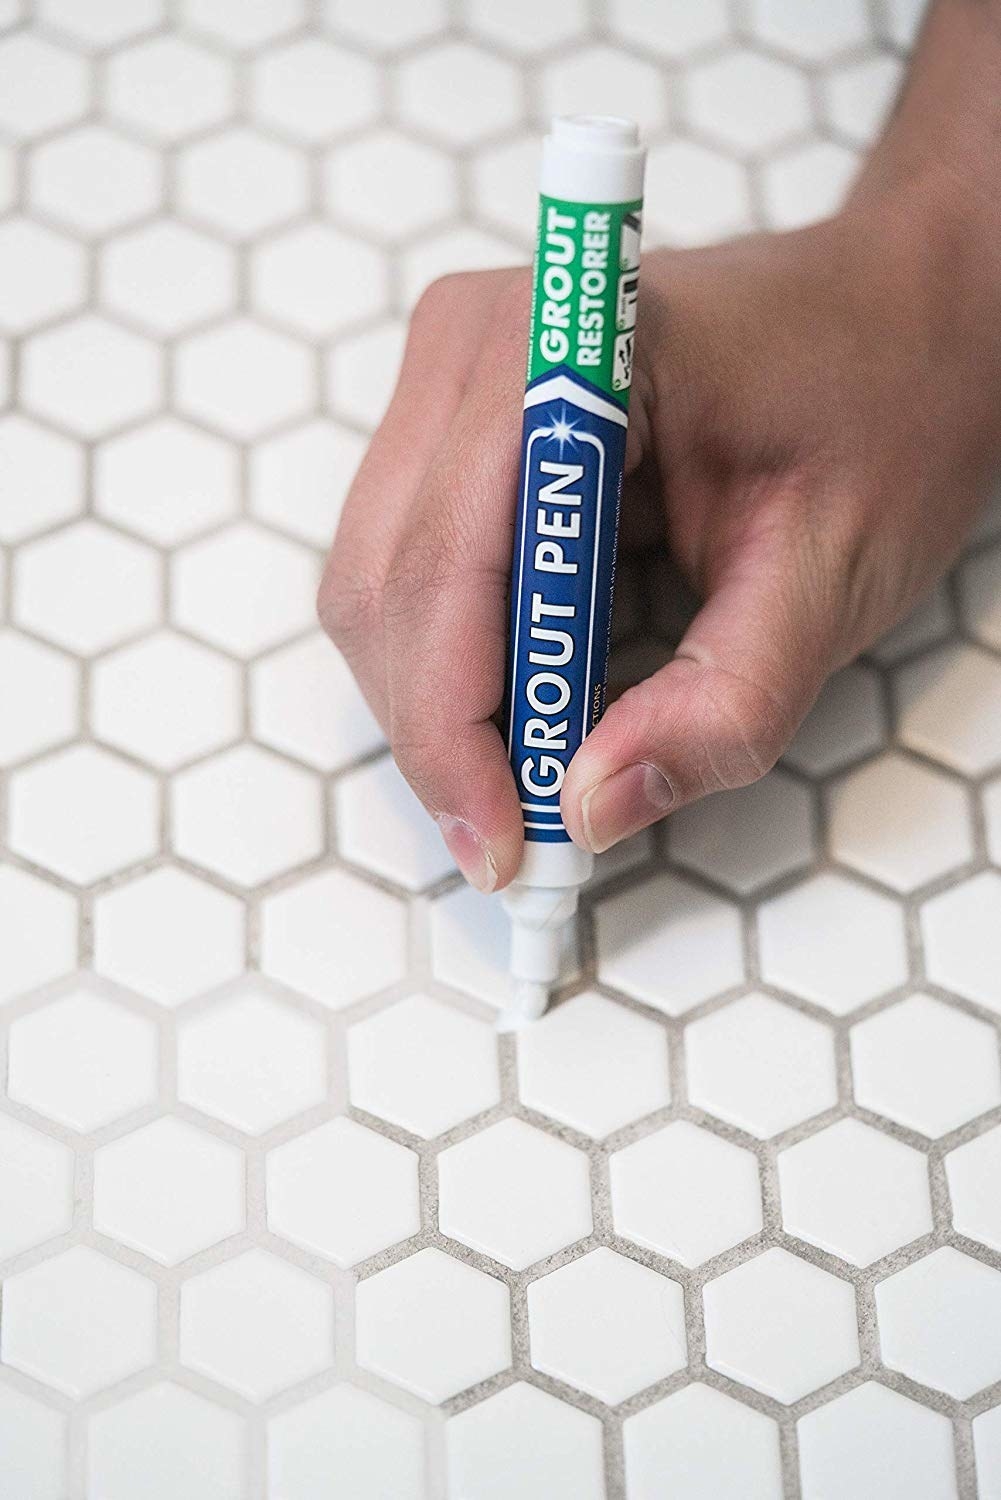 grout pen used to clean tiles 